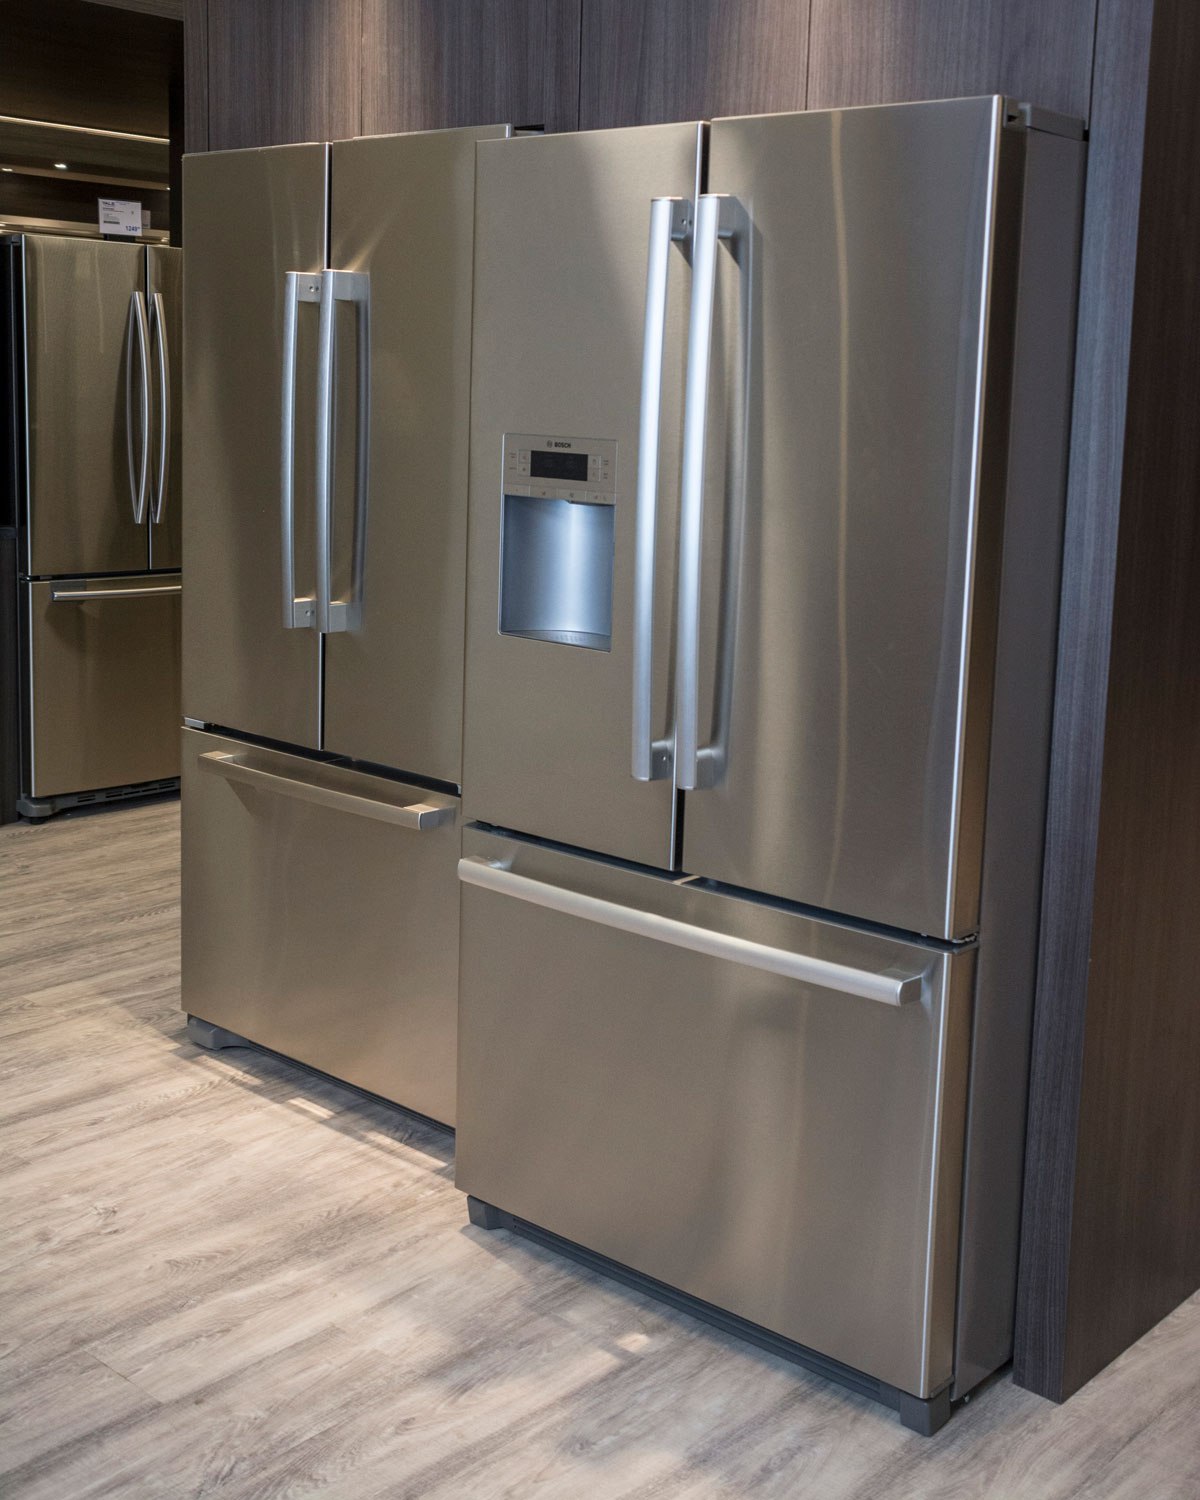 The 7 Best Counter Depth Refrigerators for 2019 (Reviews / Ratings